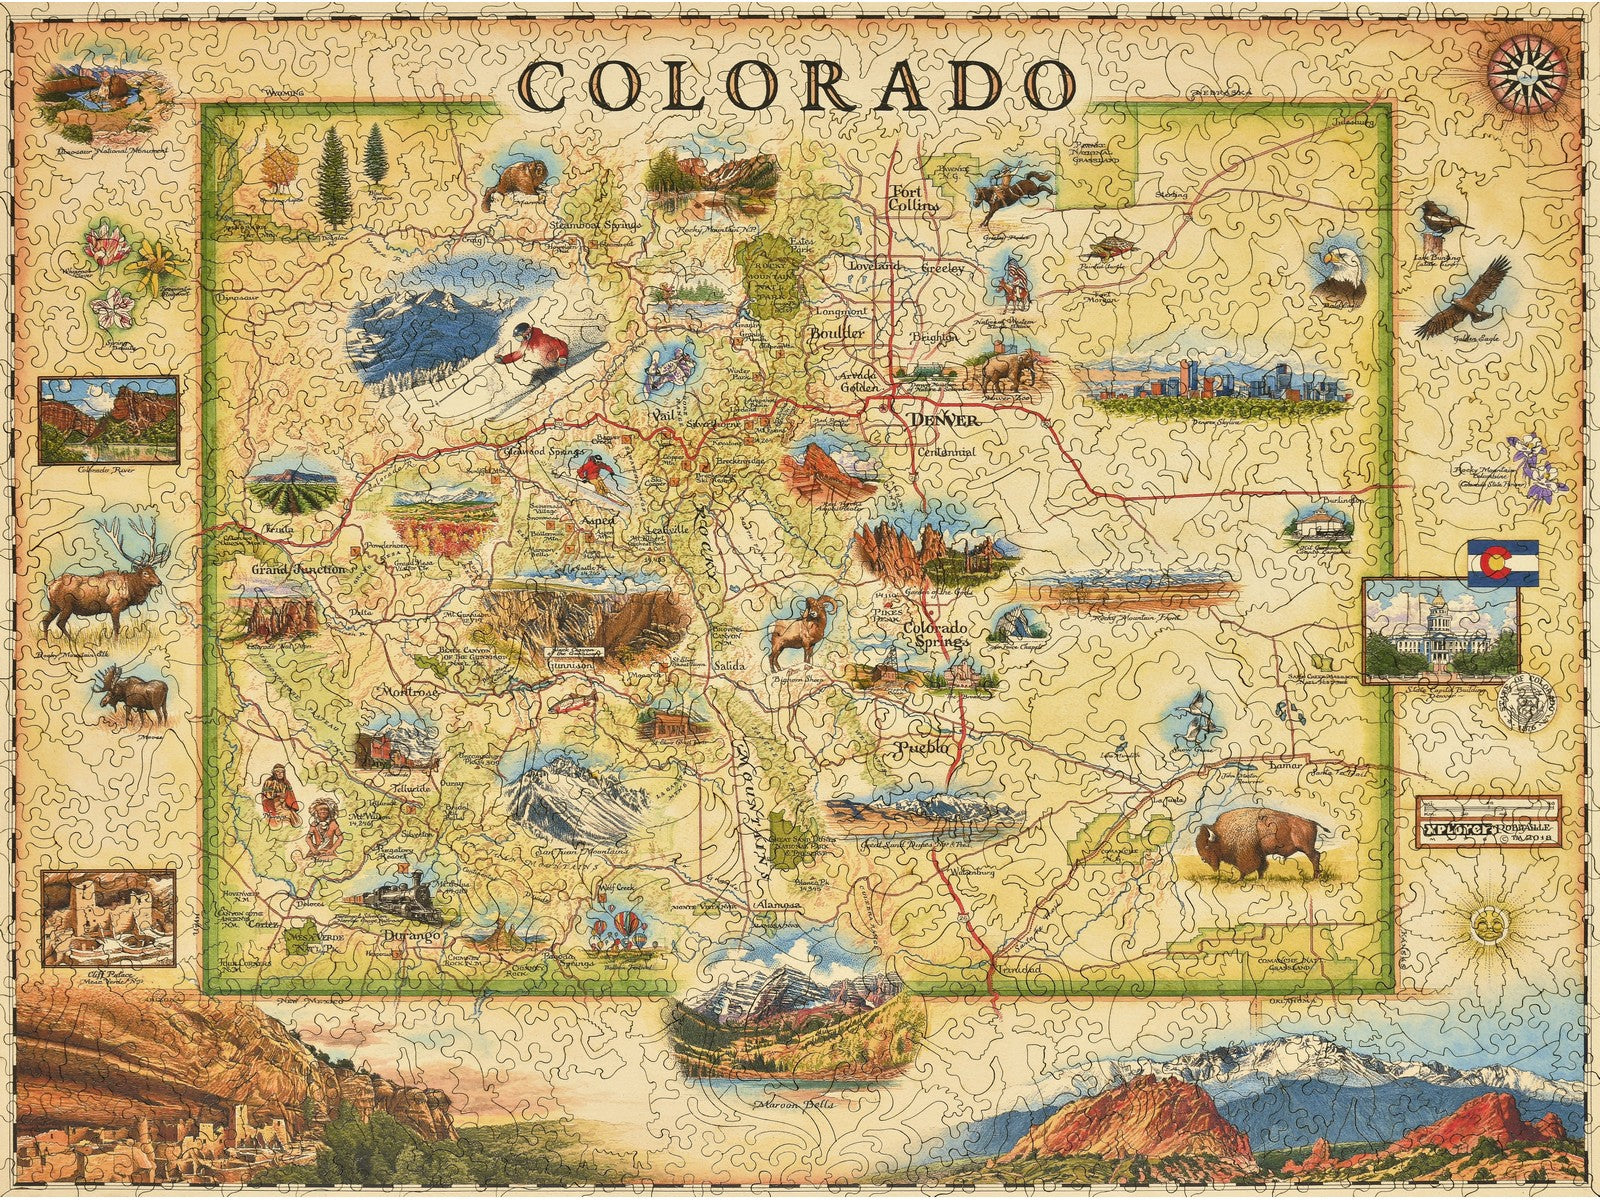 The front of the puzzle, Colorado Xplorer Map, which shows a map of colorado with illustrated places of interest.